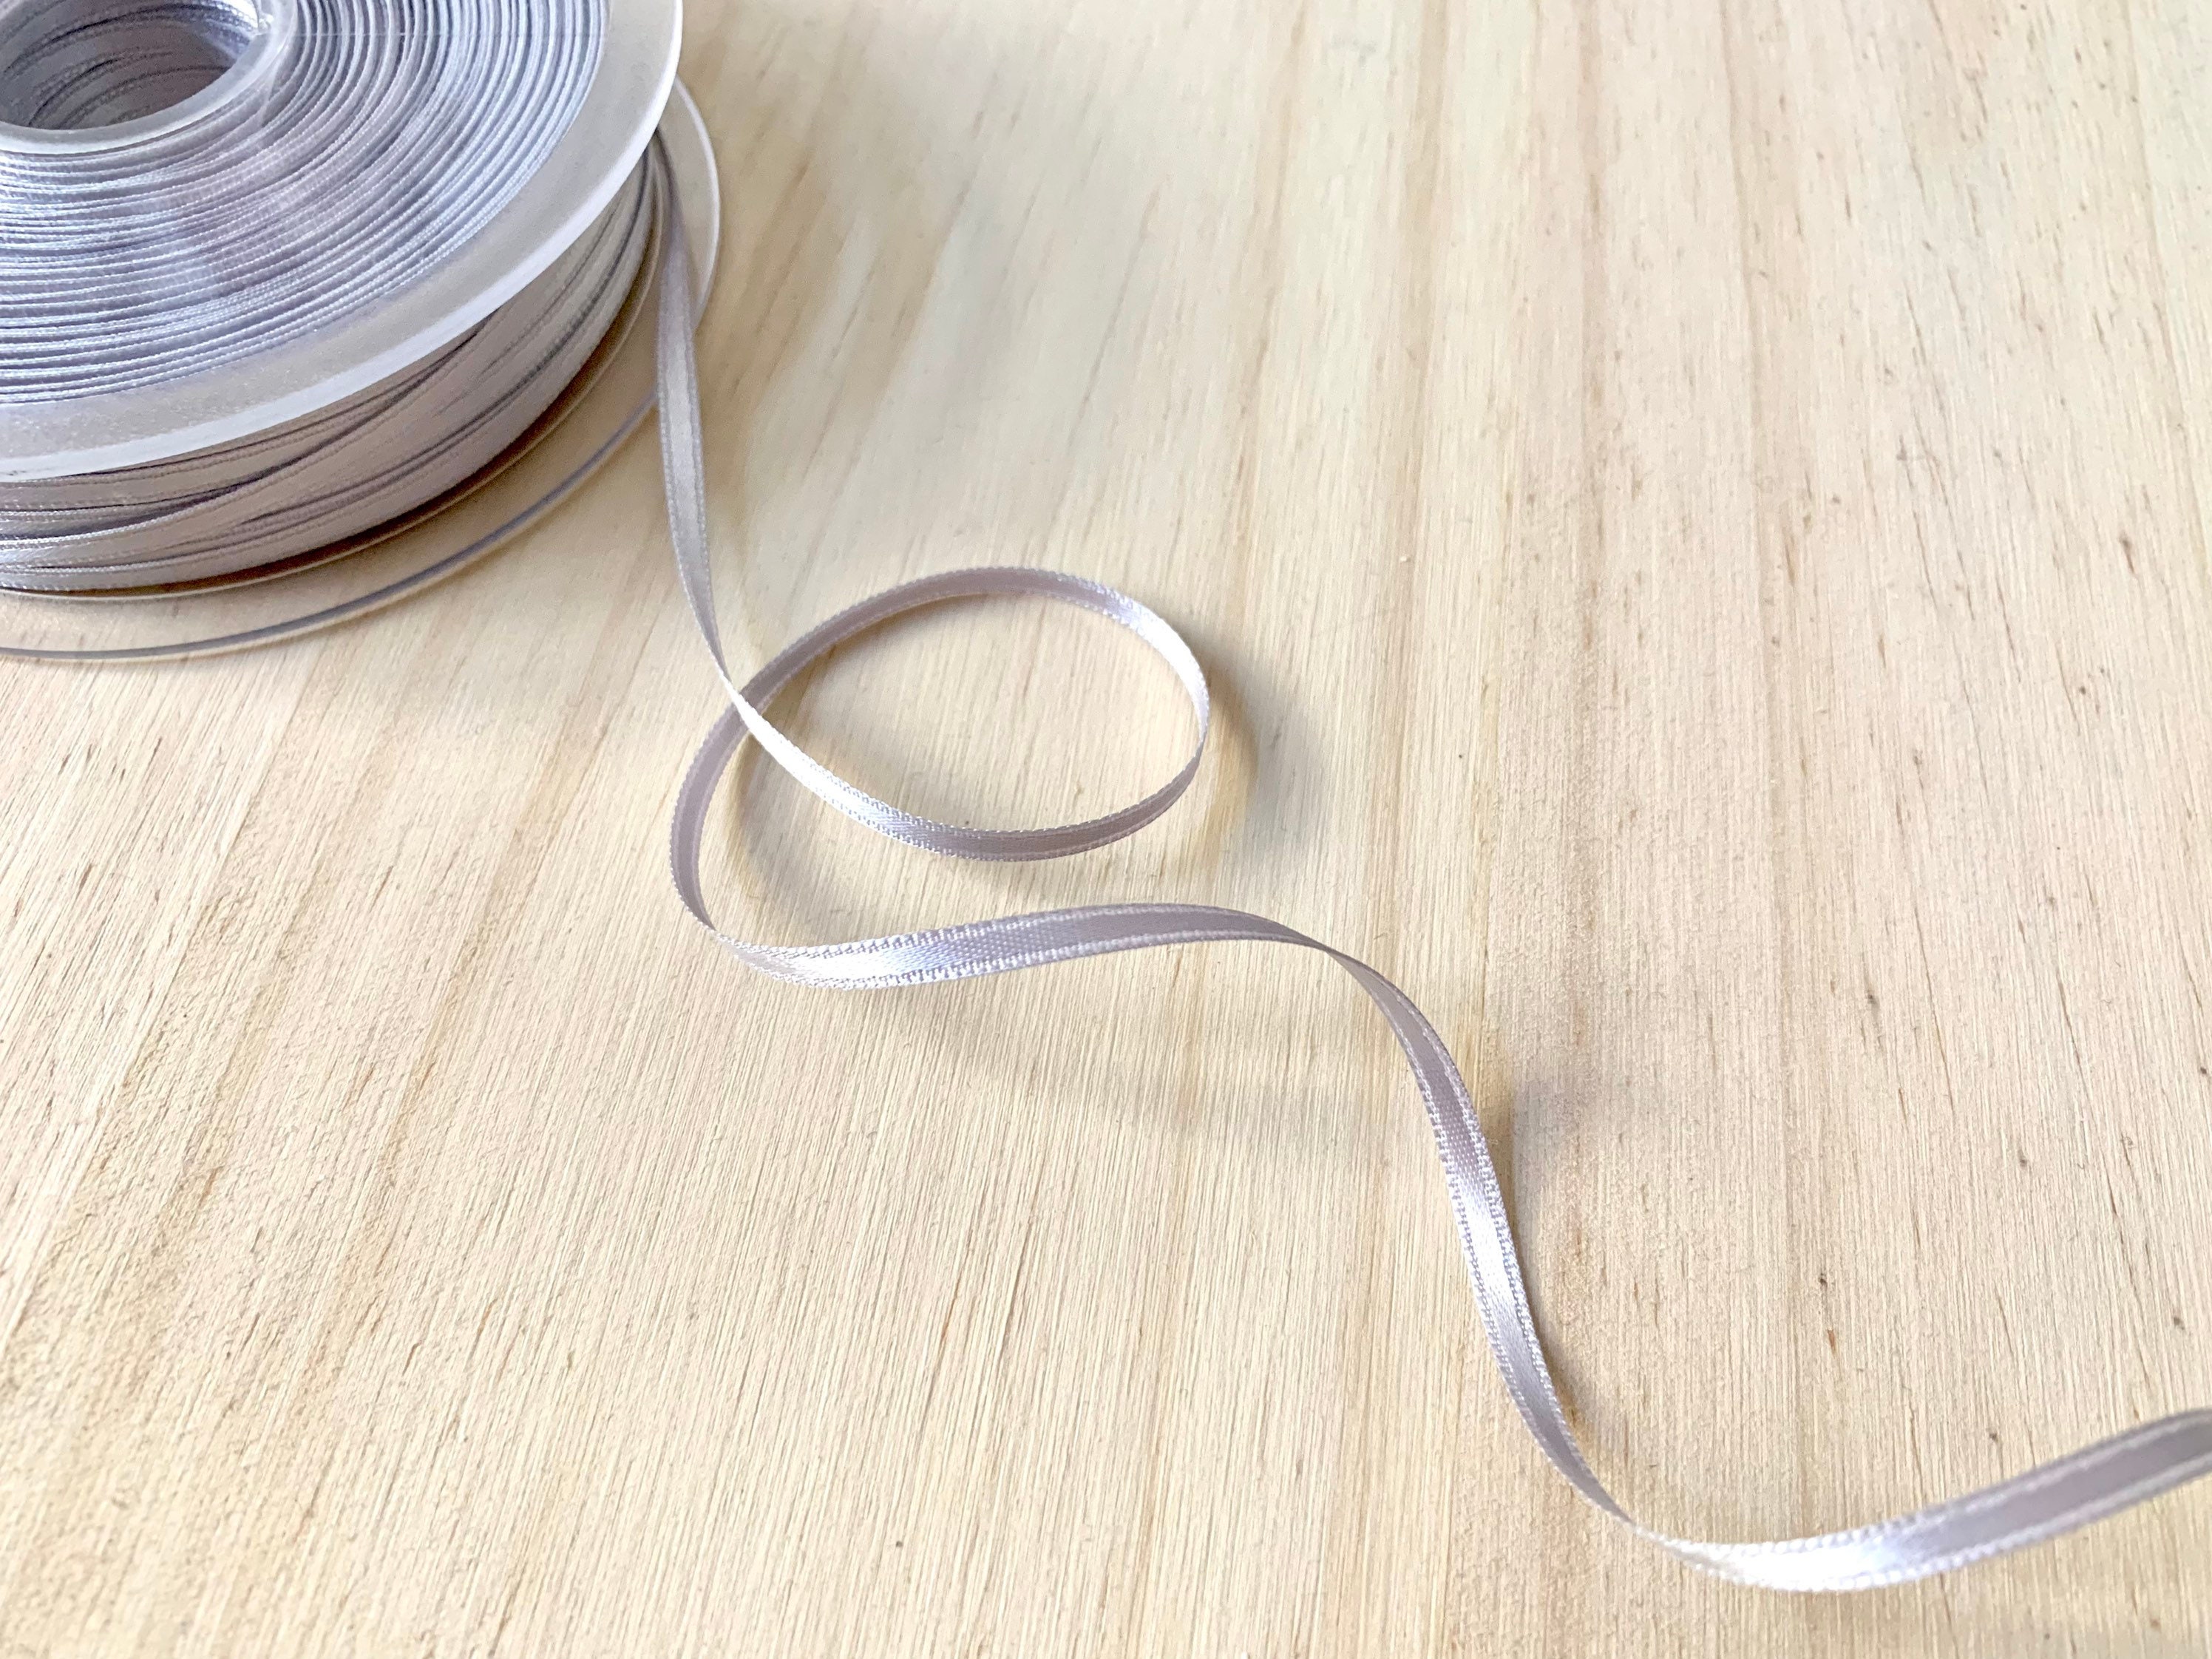 Light Silver Ribbon, Double Faced Satin Ribbon, Widths Available: 1 1/2, 1,  6/8, 5/8, 3/8, 1/4, 1/8 